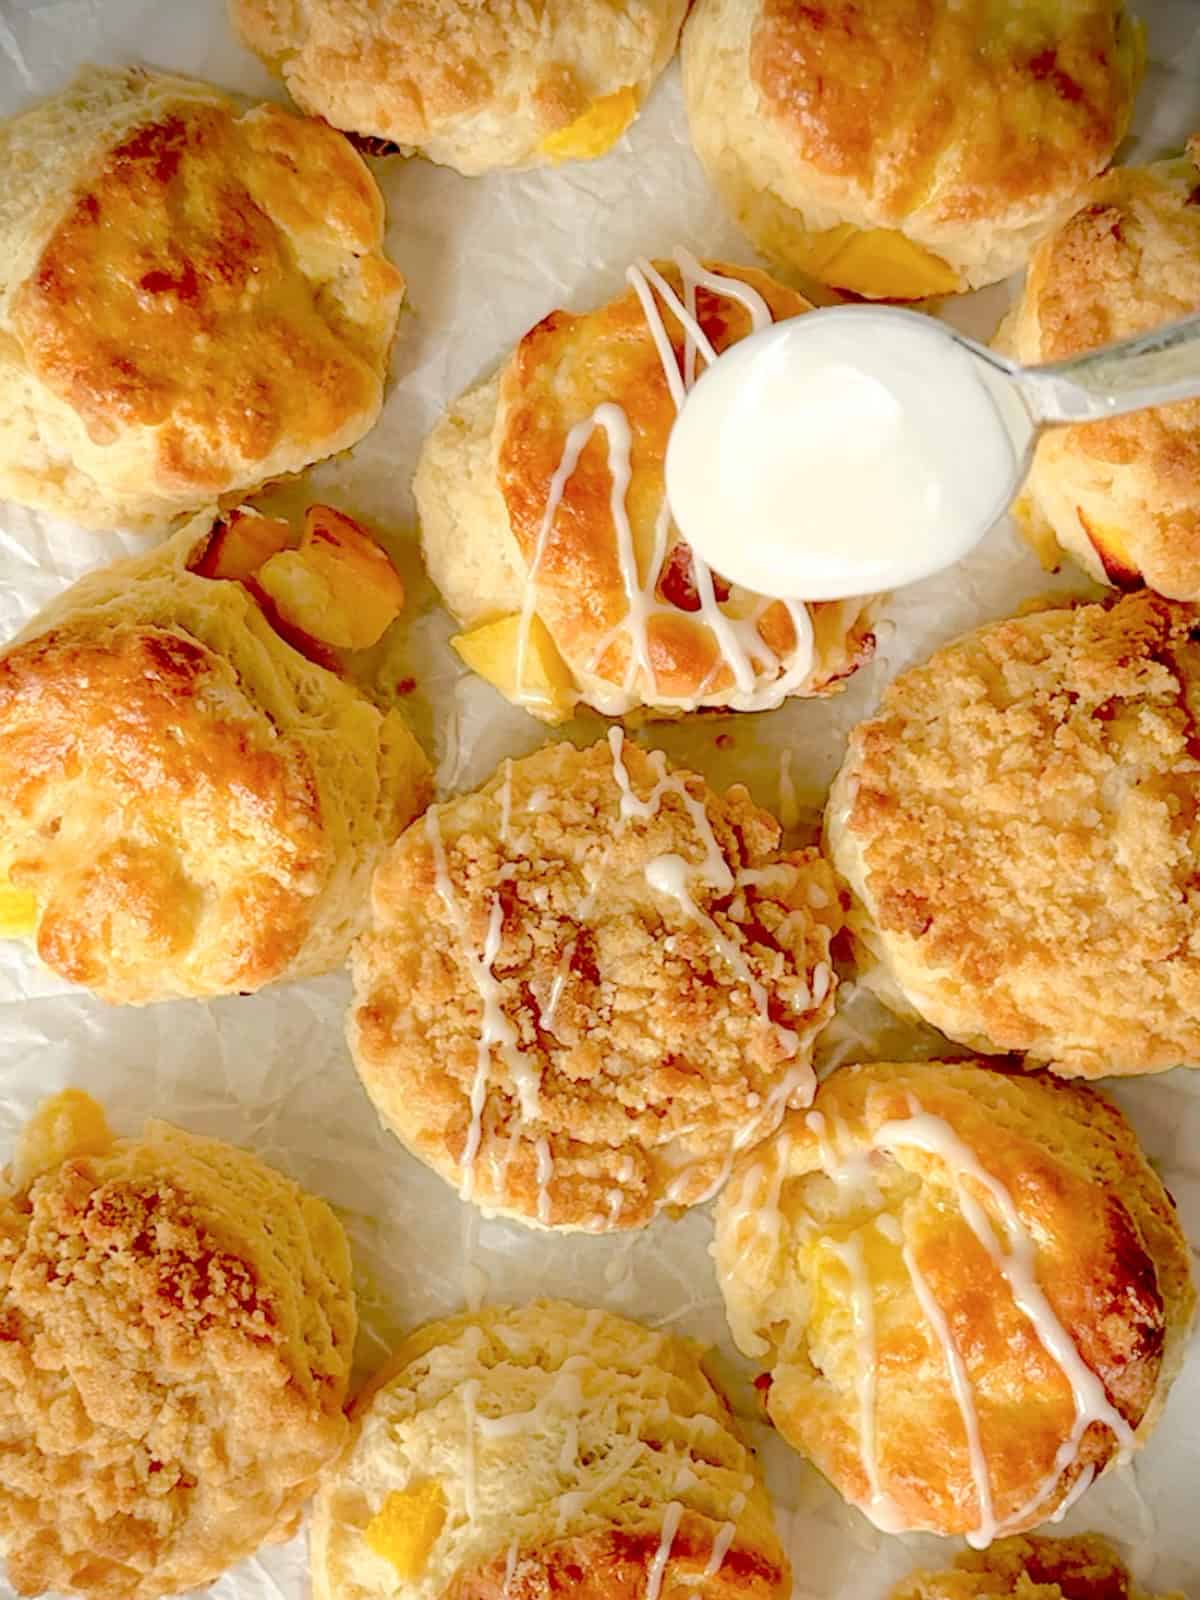 Drizzling vanilla glaze on top of biscuits.